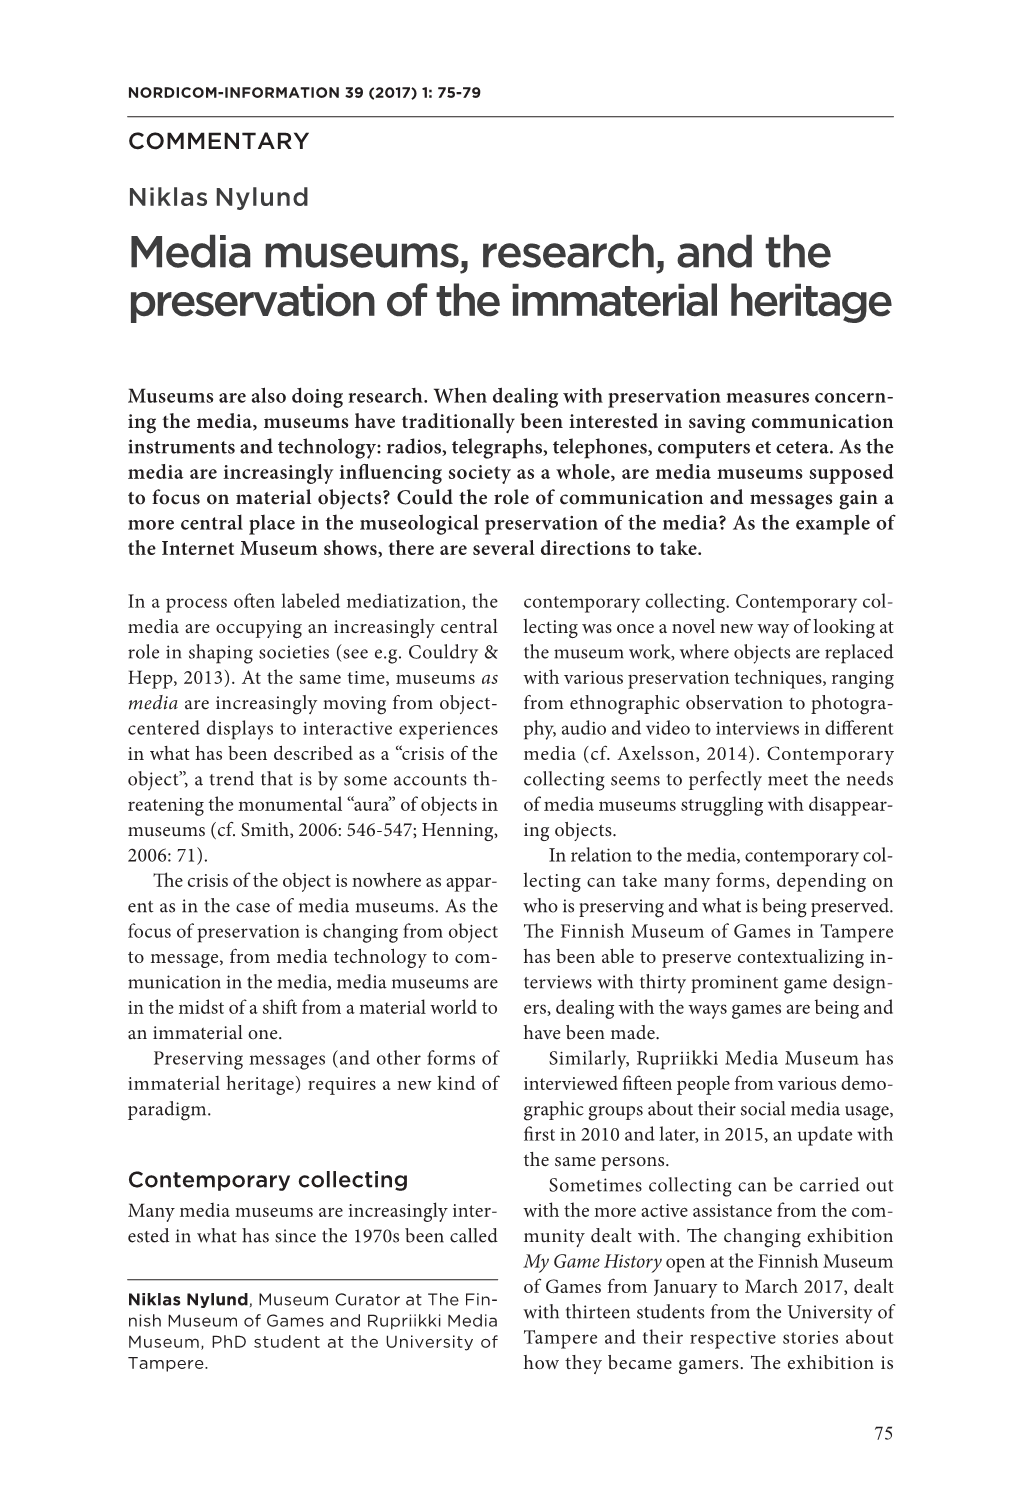 Media Museums, Research, and the Preservation of the Immaterial Heritage